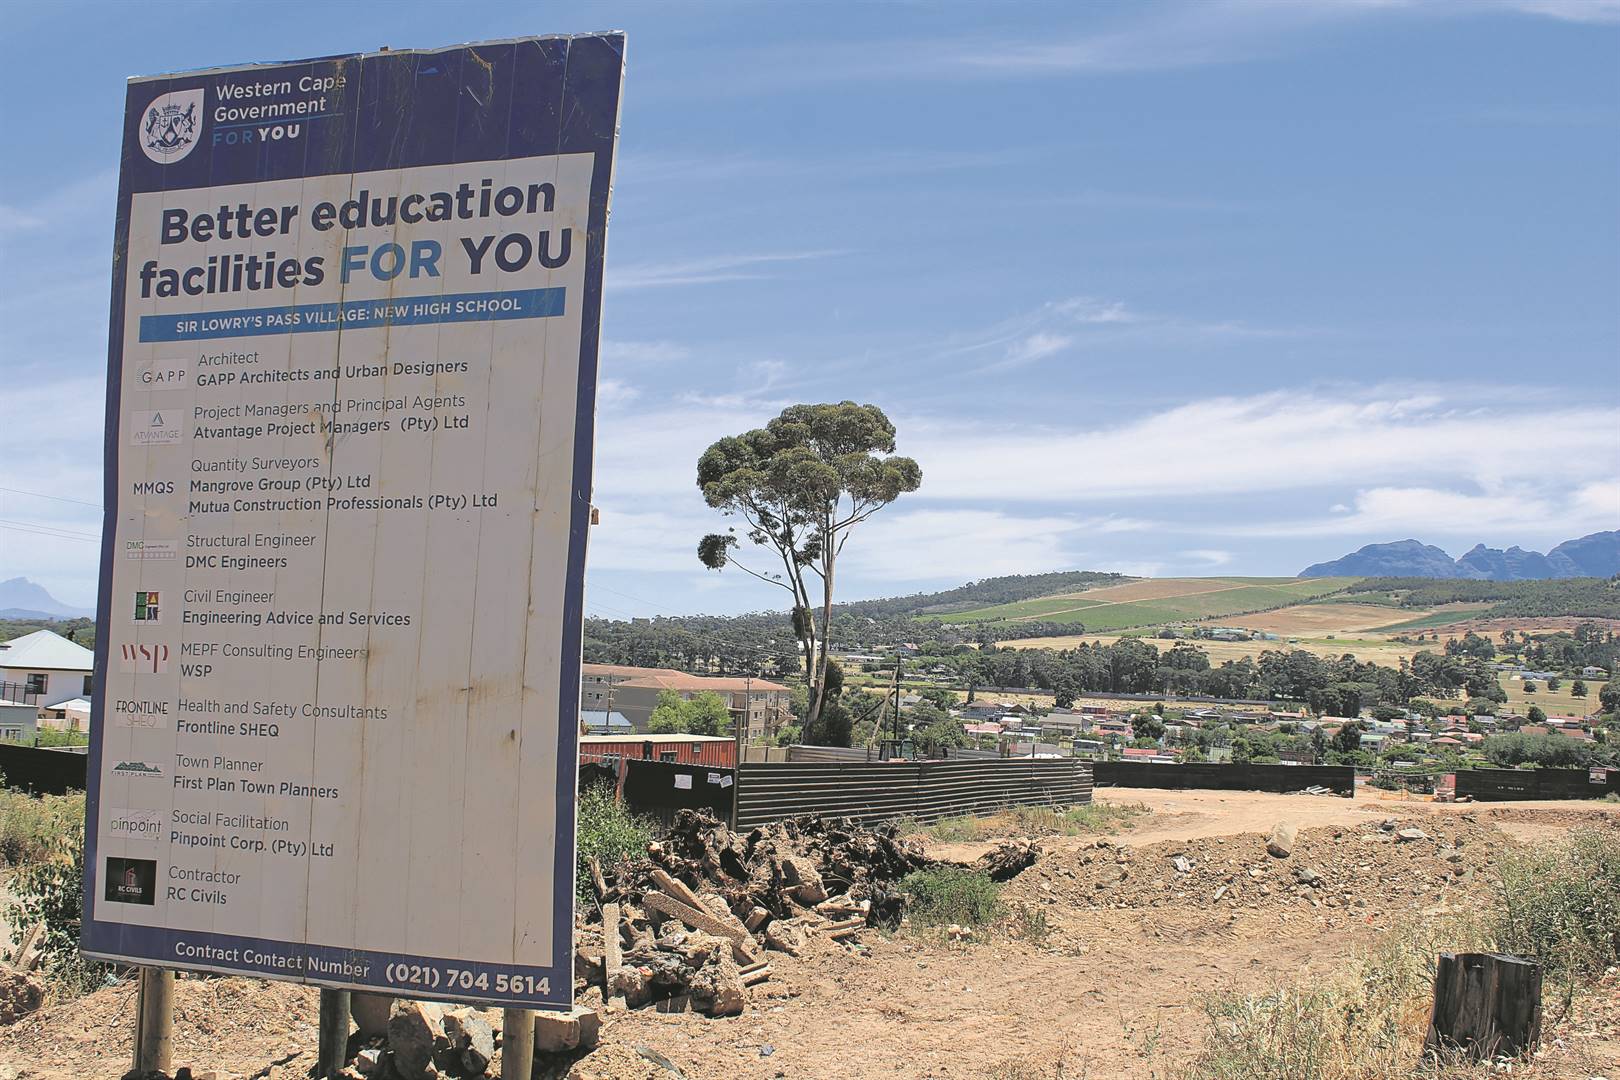 For more than a week now the construction of a new high school in Sir Lowry’s Pass has been halted.Photo: Yaseen Gaffar